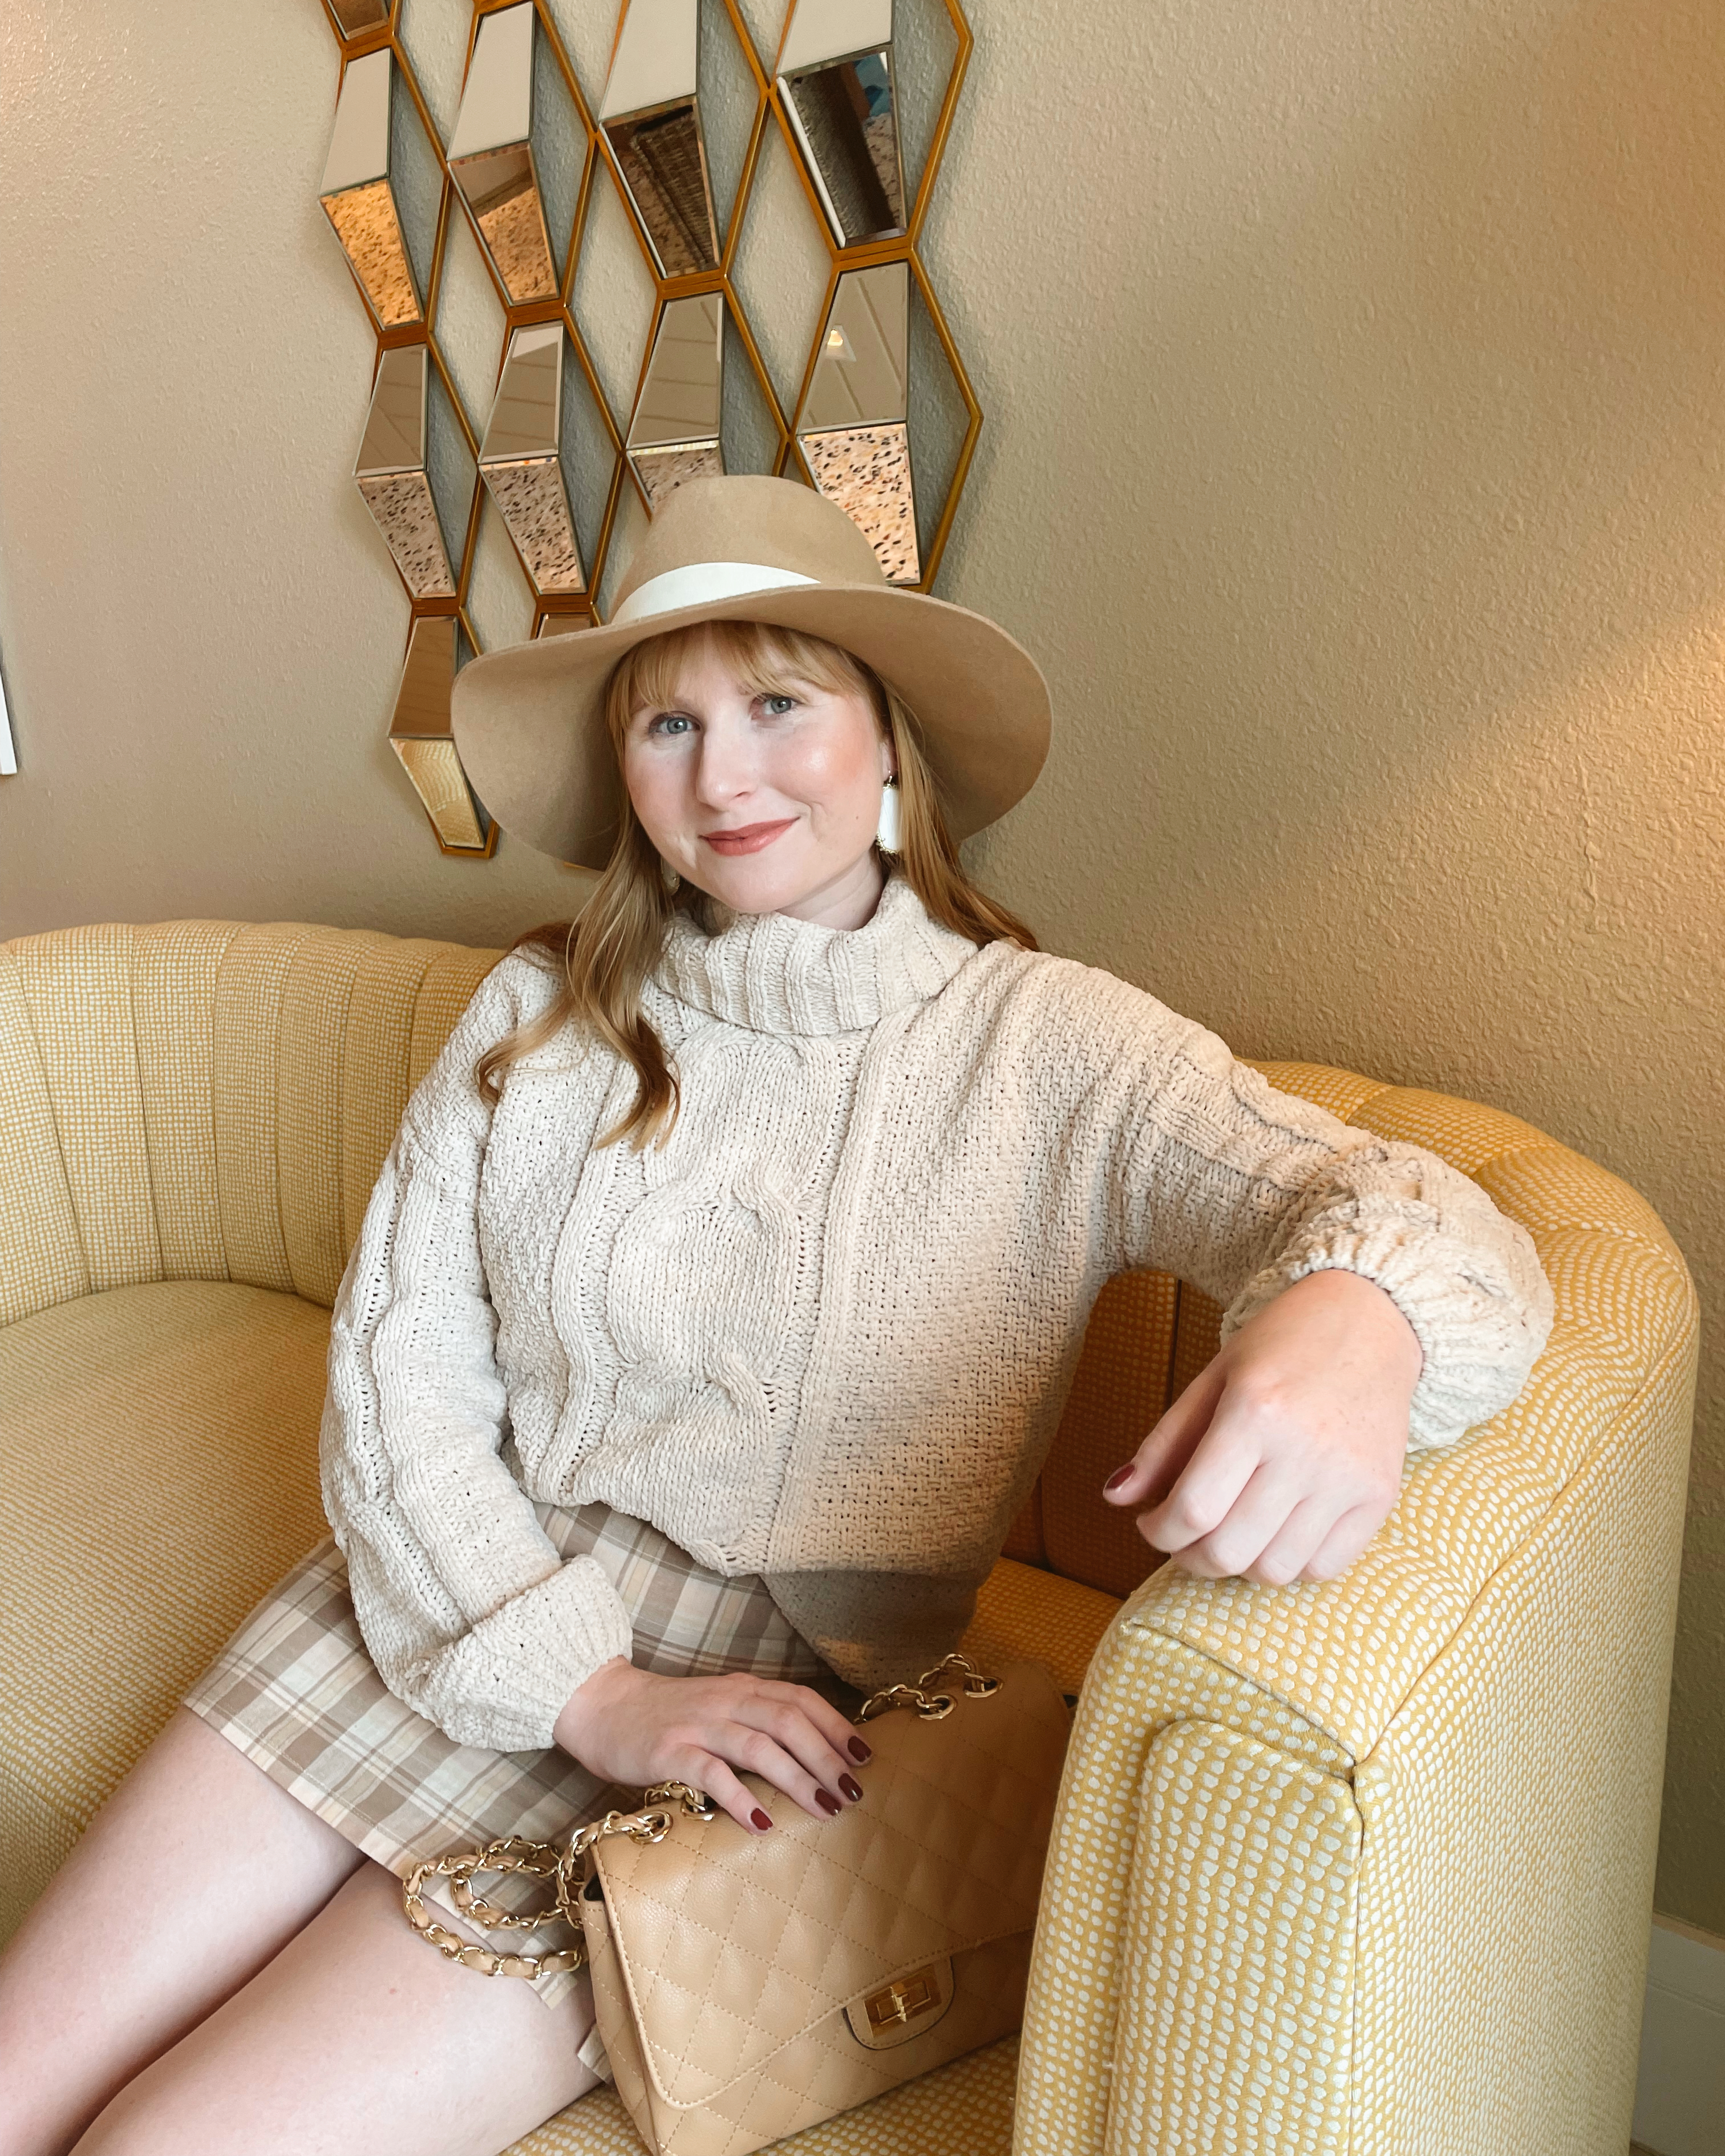 Affordable by Amanda wears a beige cream cable knit turtleneck sweater with a plaid mini skirt while sitting on a yellow couch